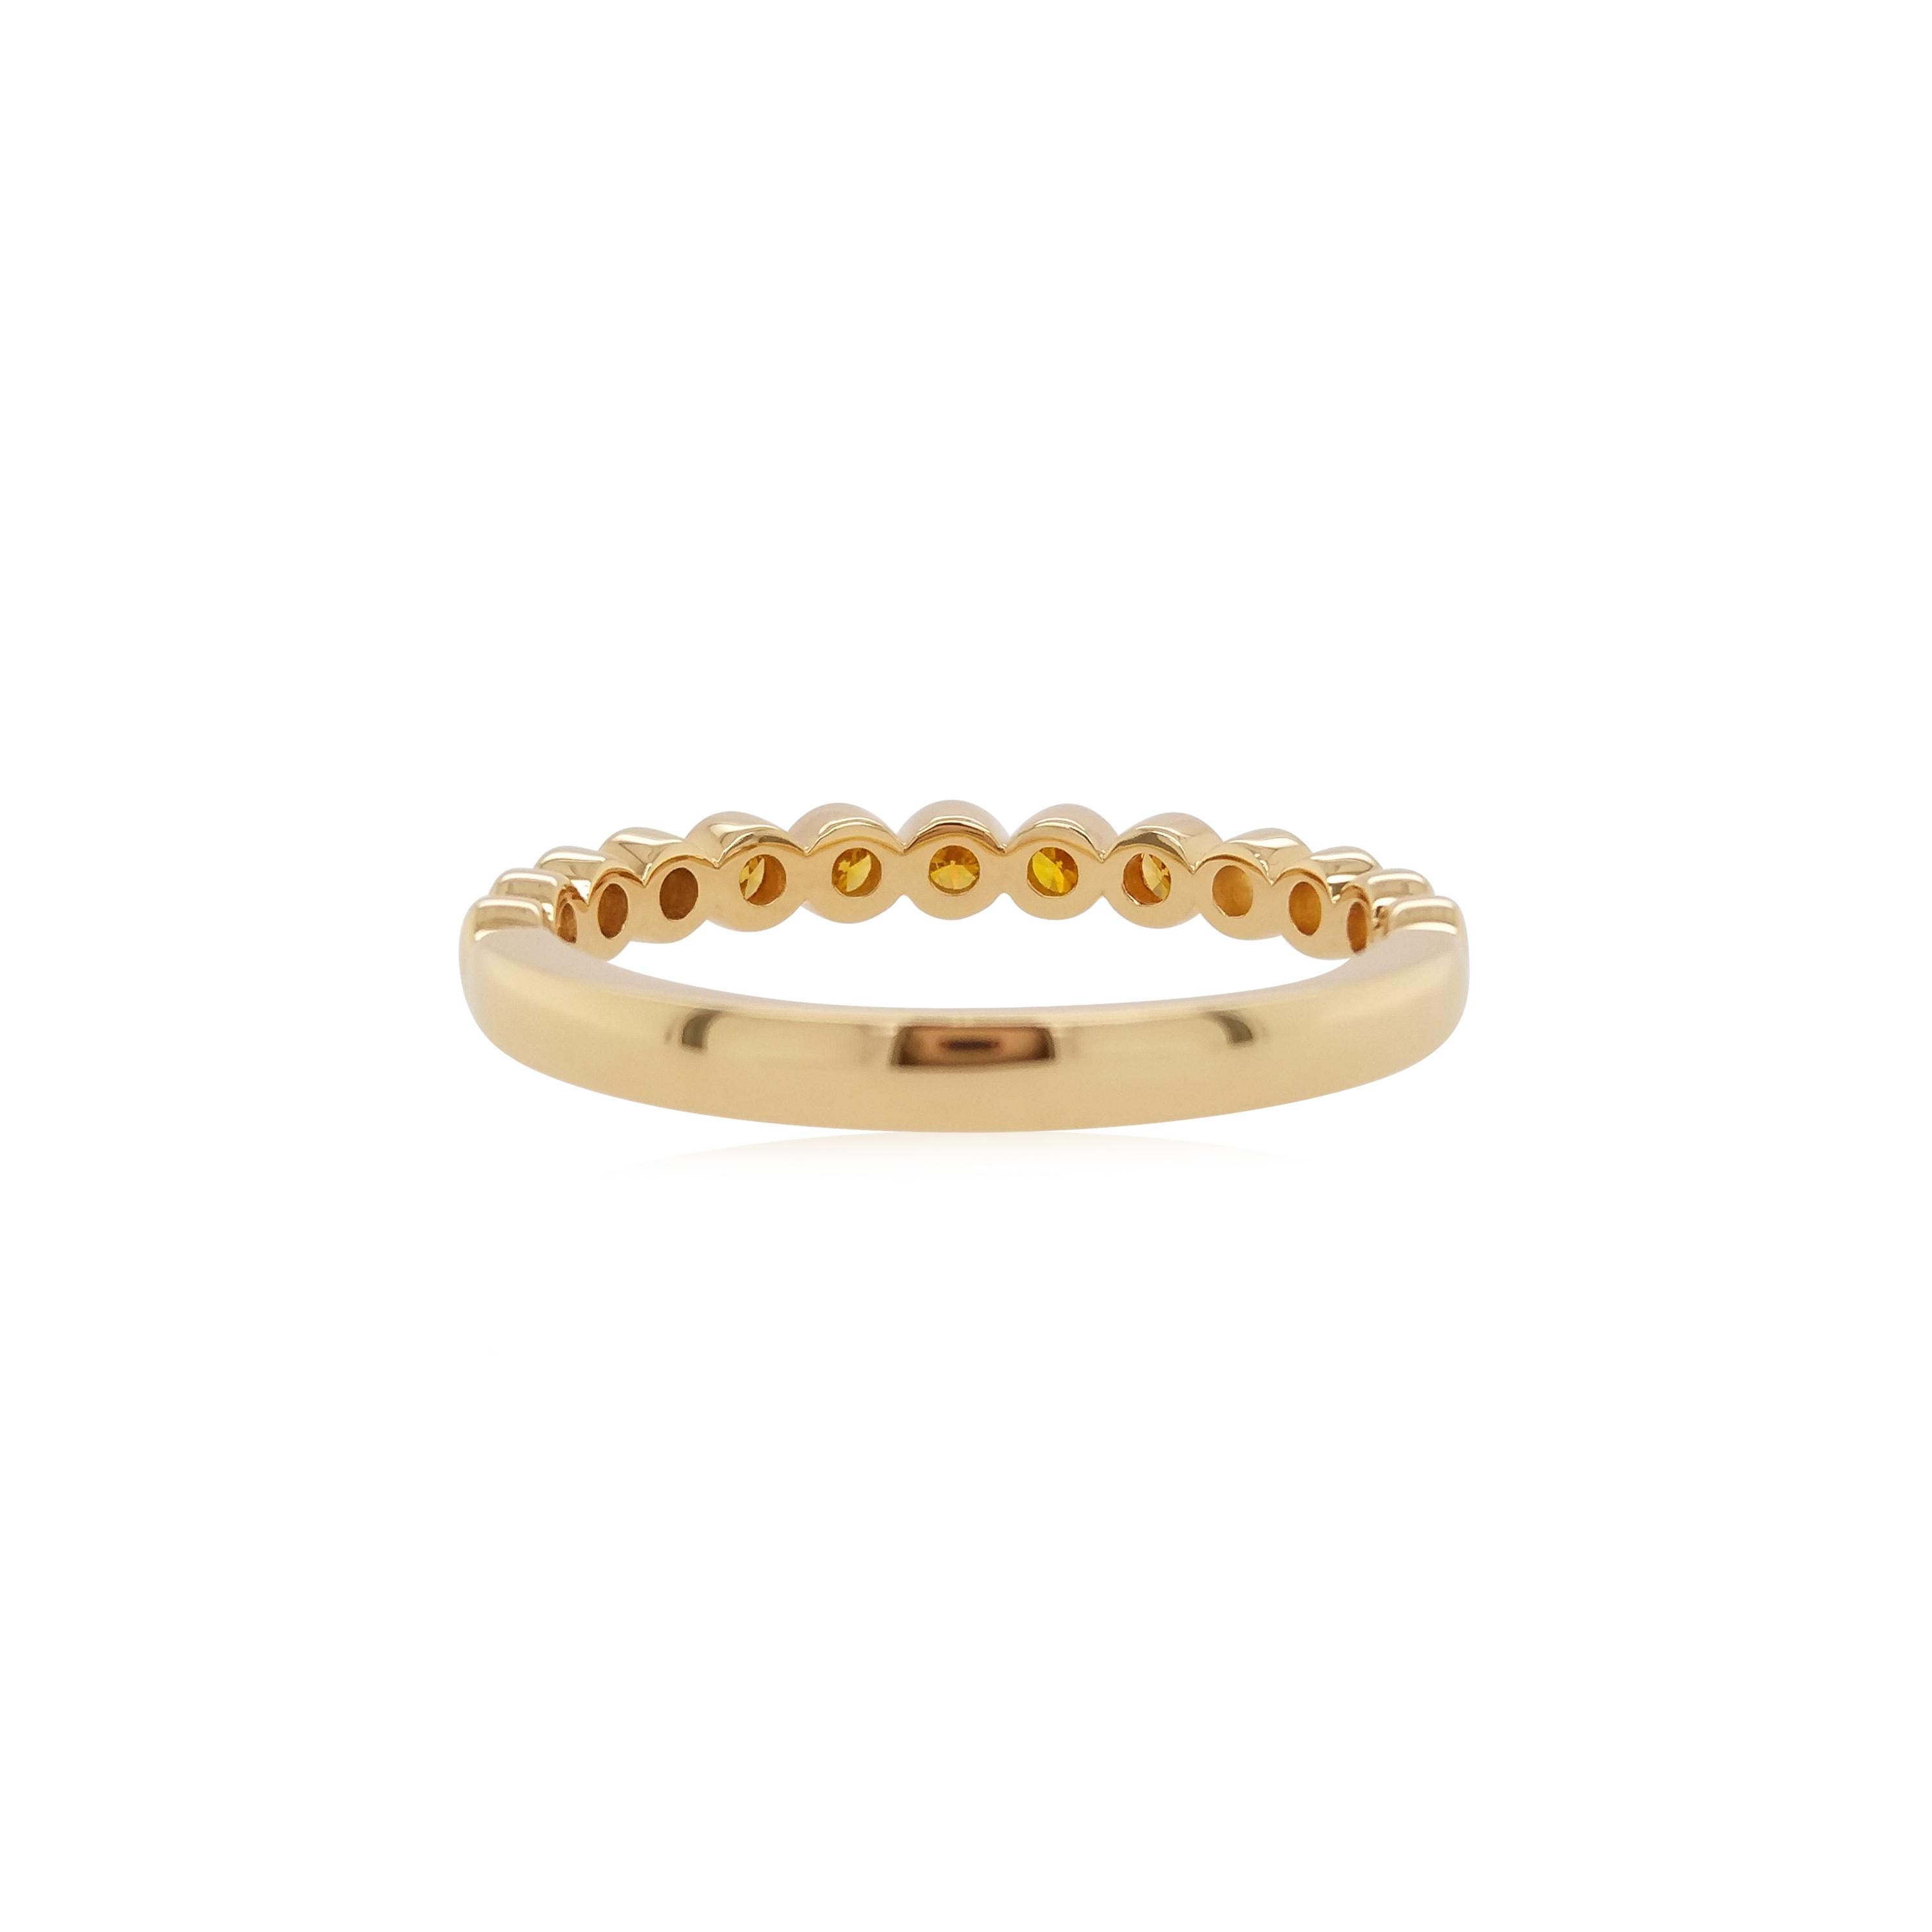 Contemporary Rare Brilliant-Cut Yellow Diamond Band Ring made in 18K Gold For Sale